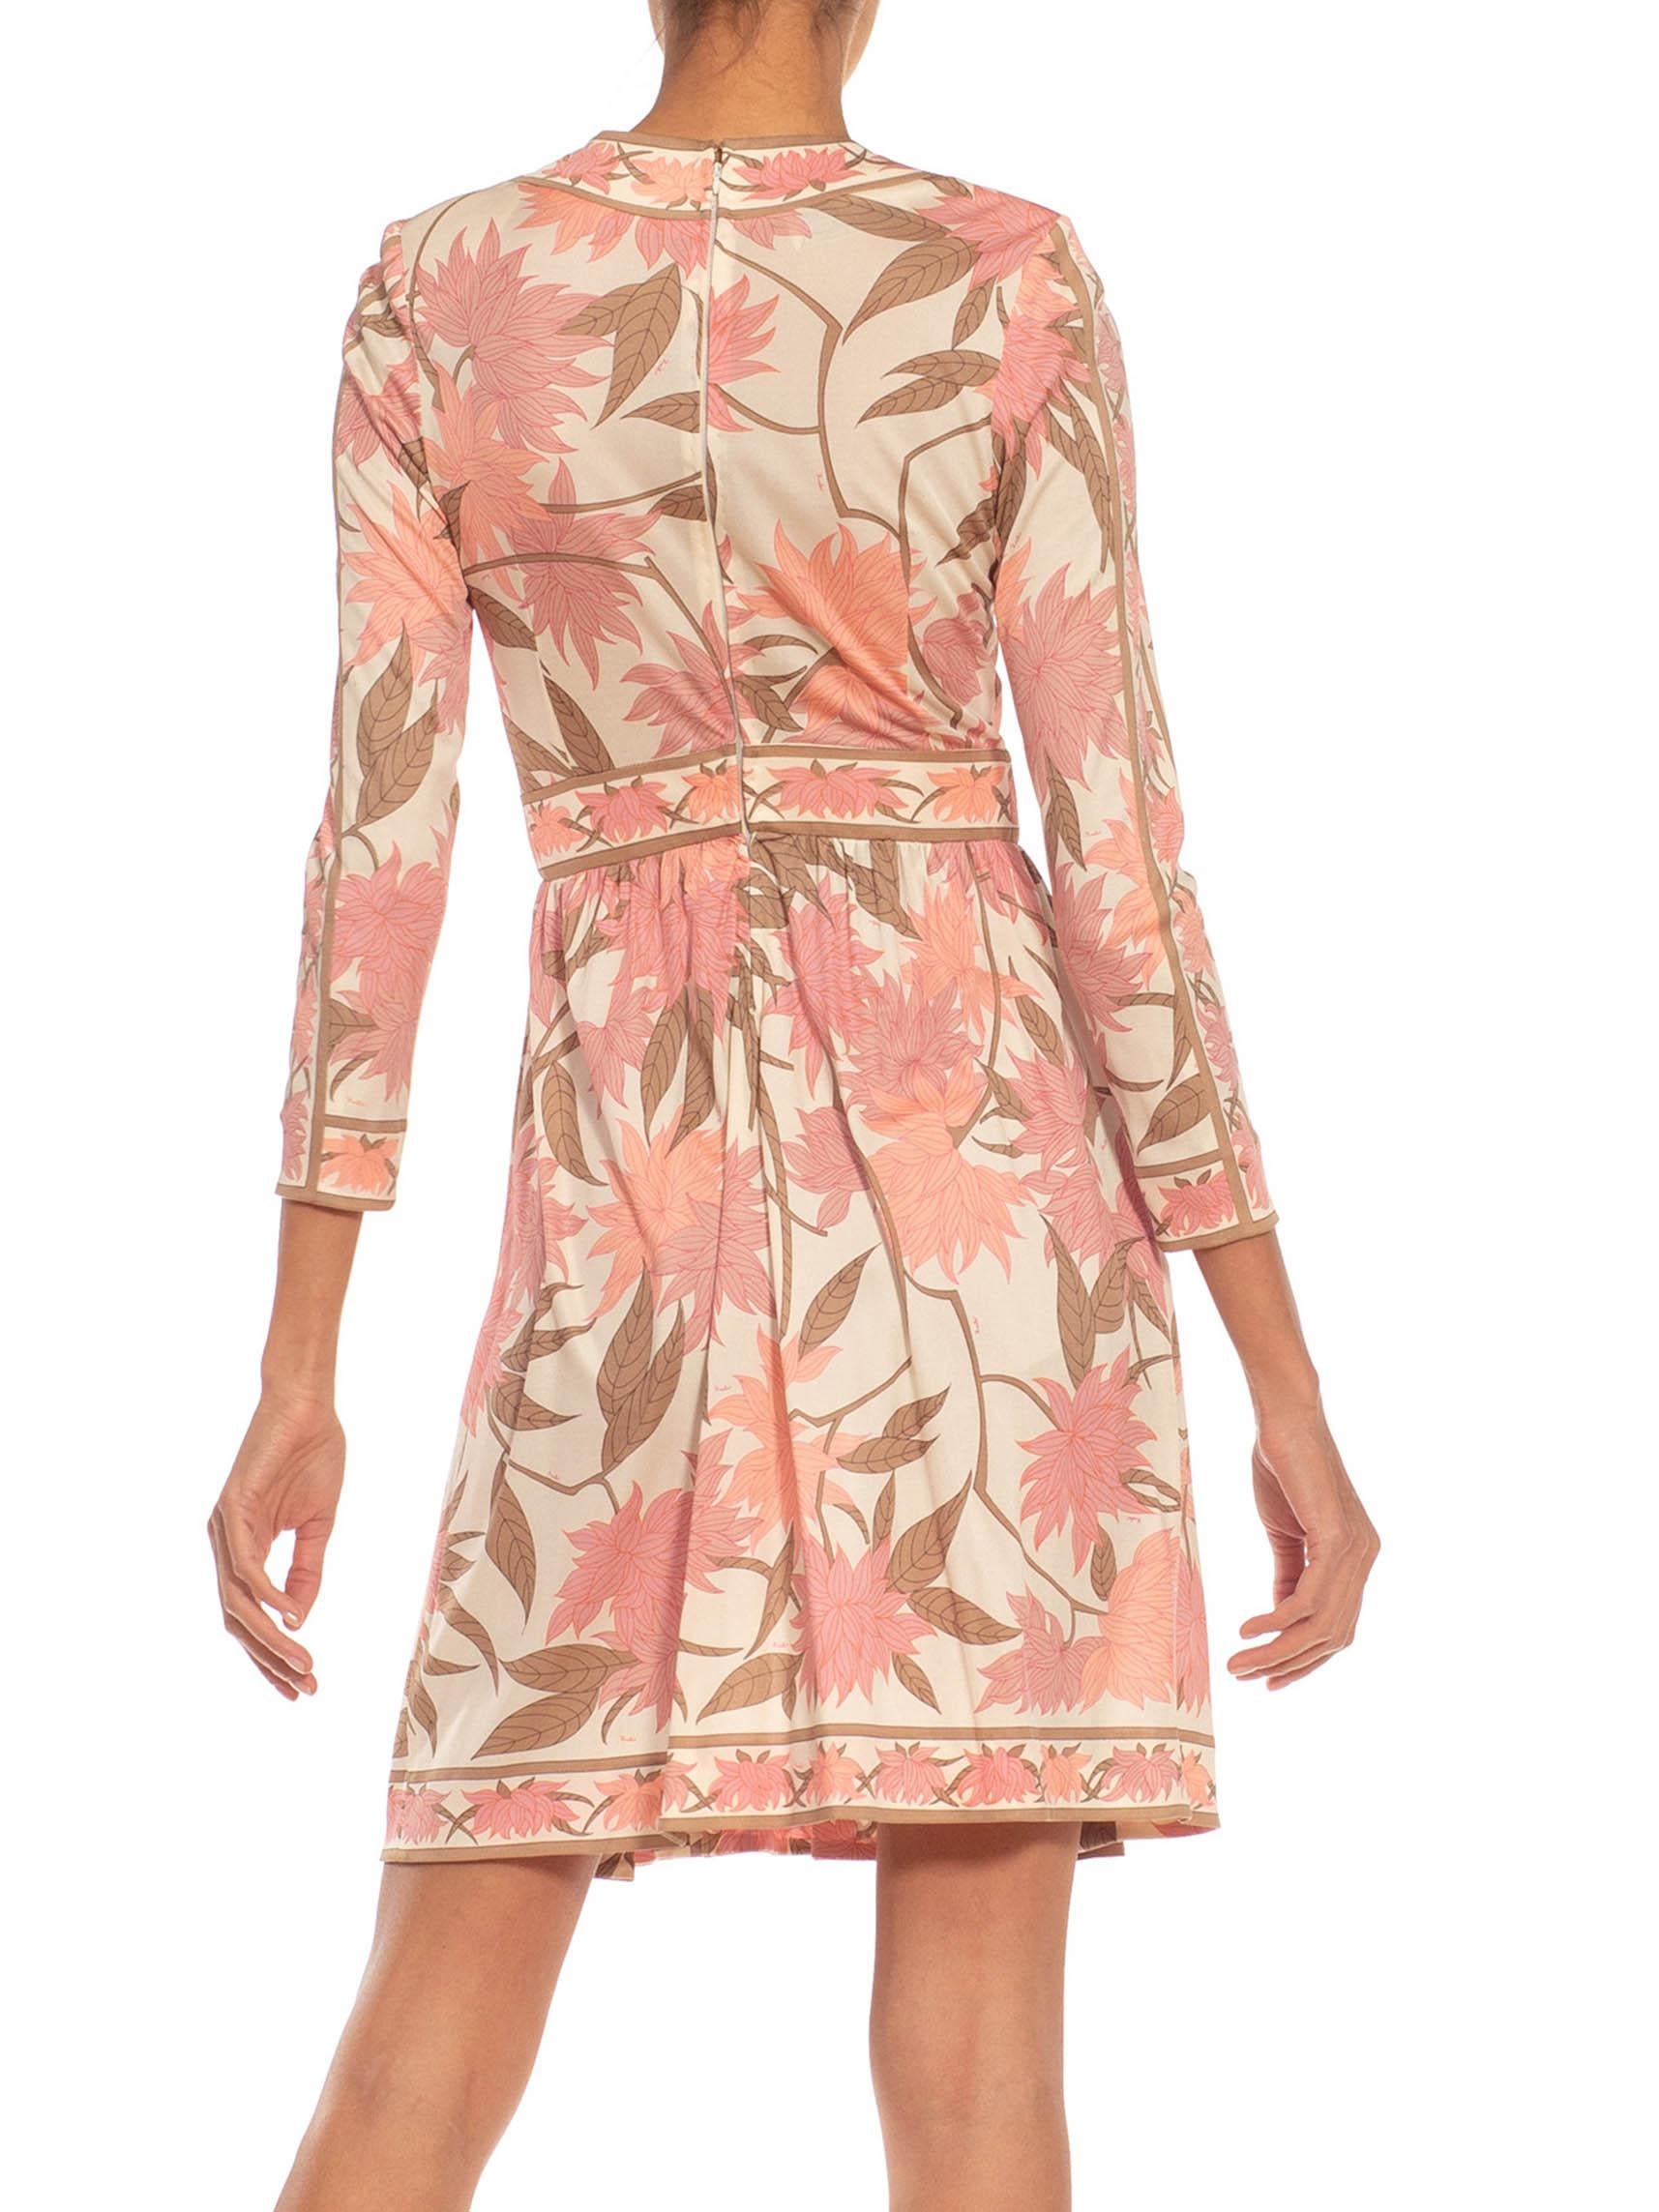 1970S EMILIO PUCCI Cream, Brown & Pink Floral Silk Rayon Blend Signed Dress For Sale 1